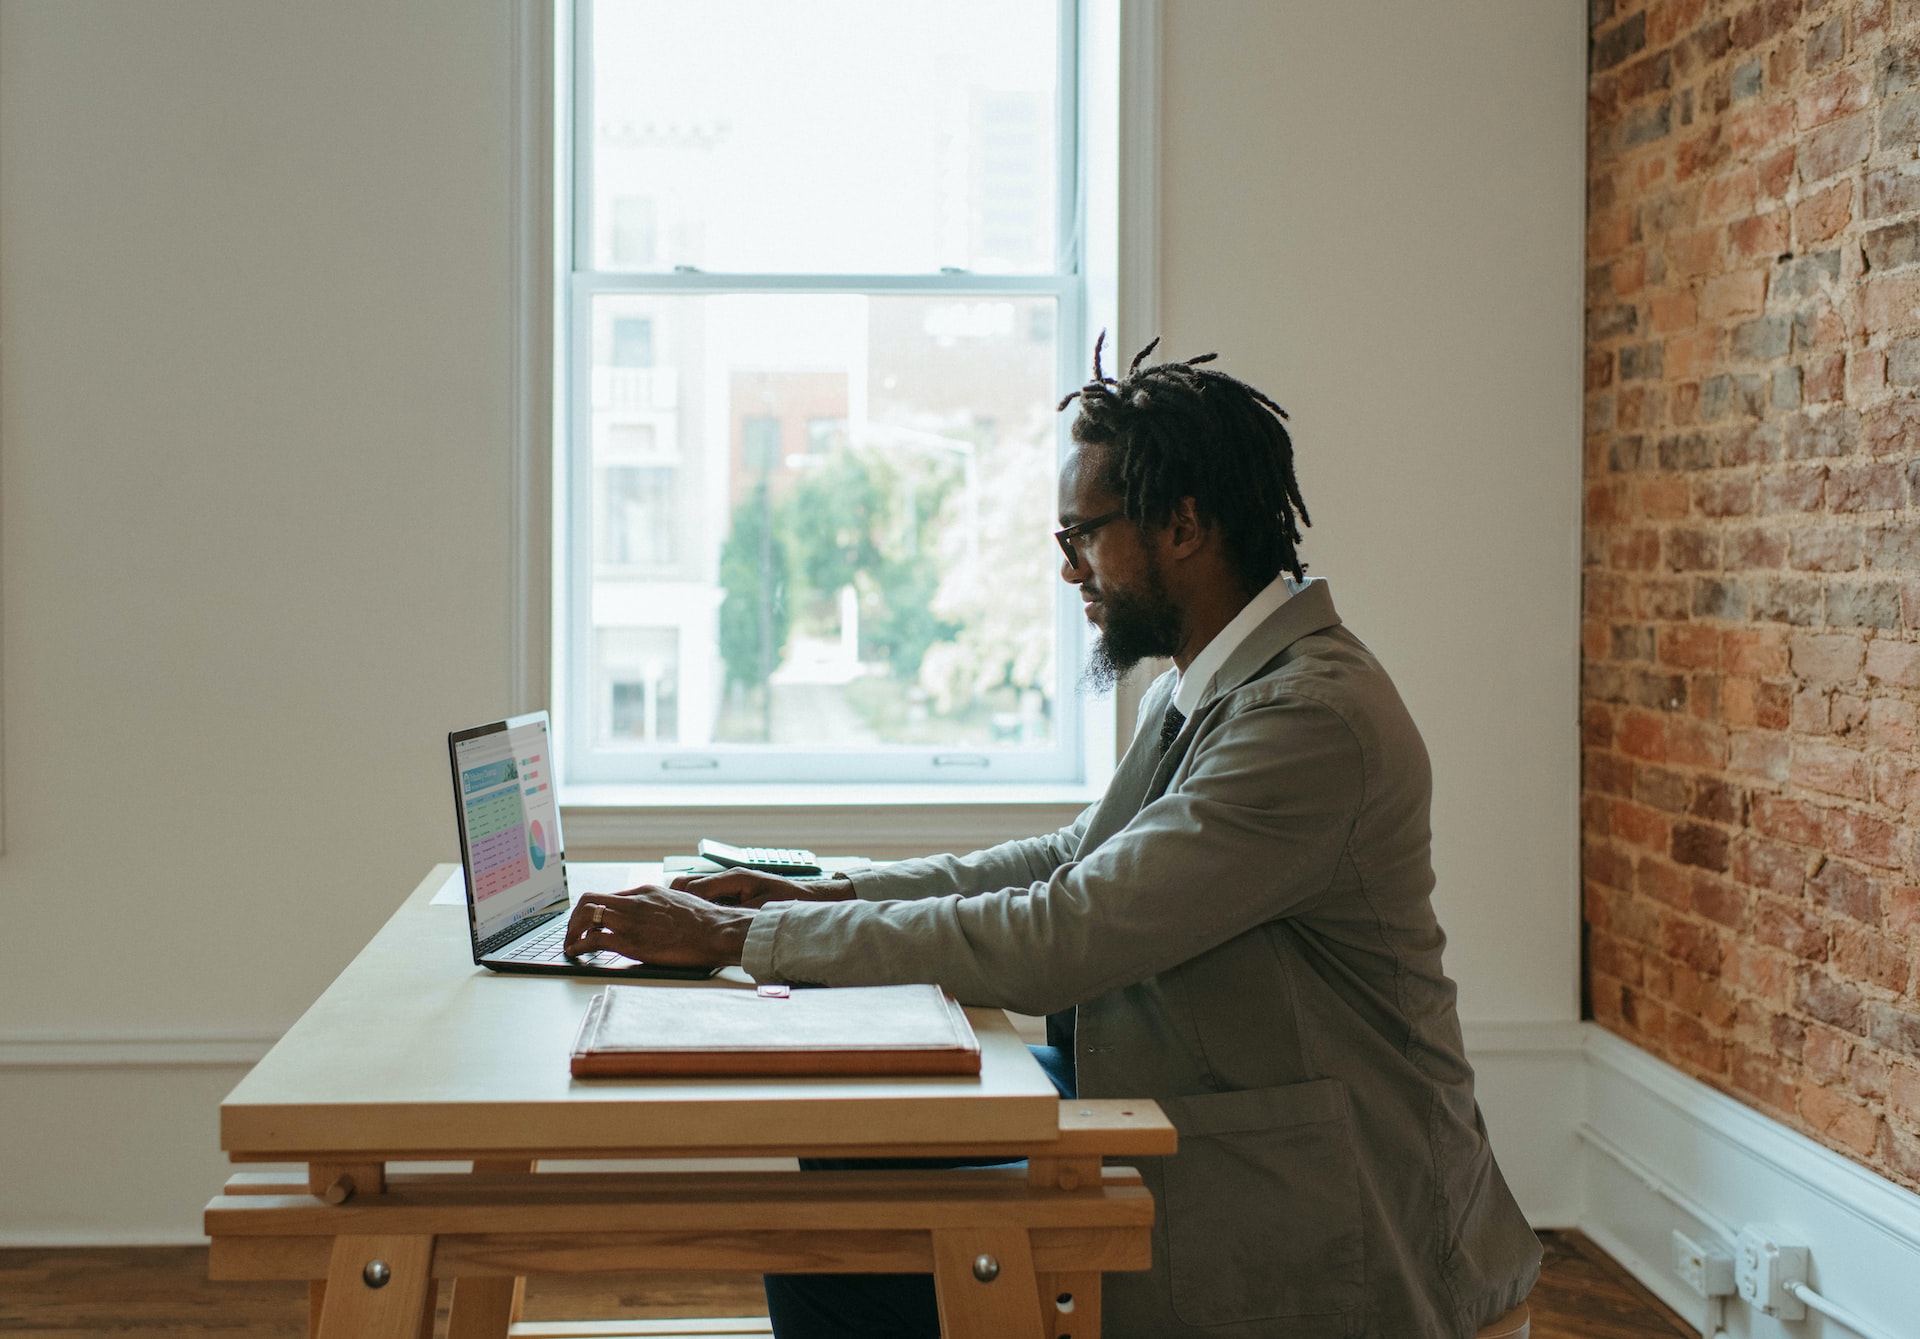 A business man sitting at a desk, working on a laptop